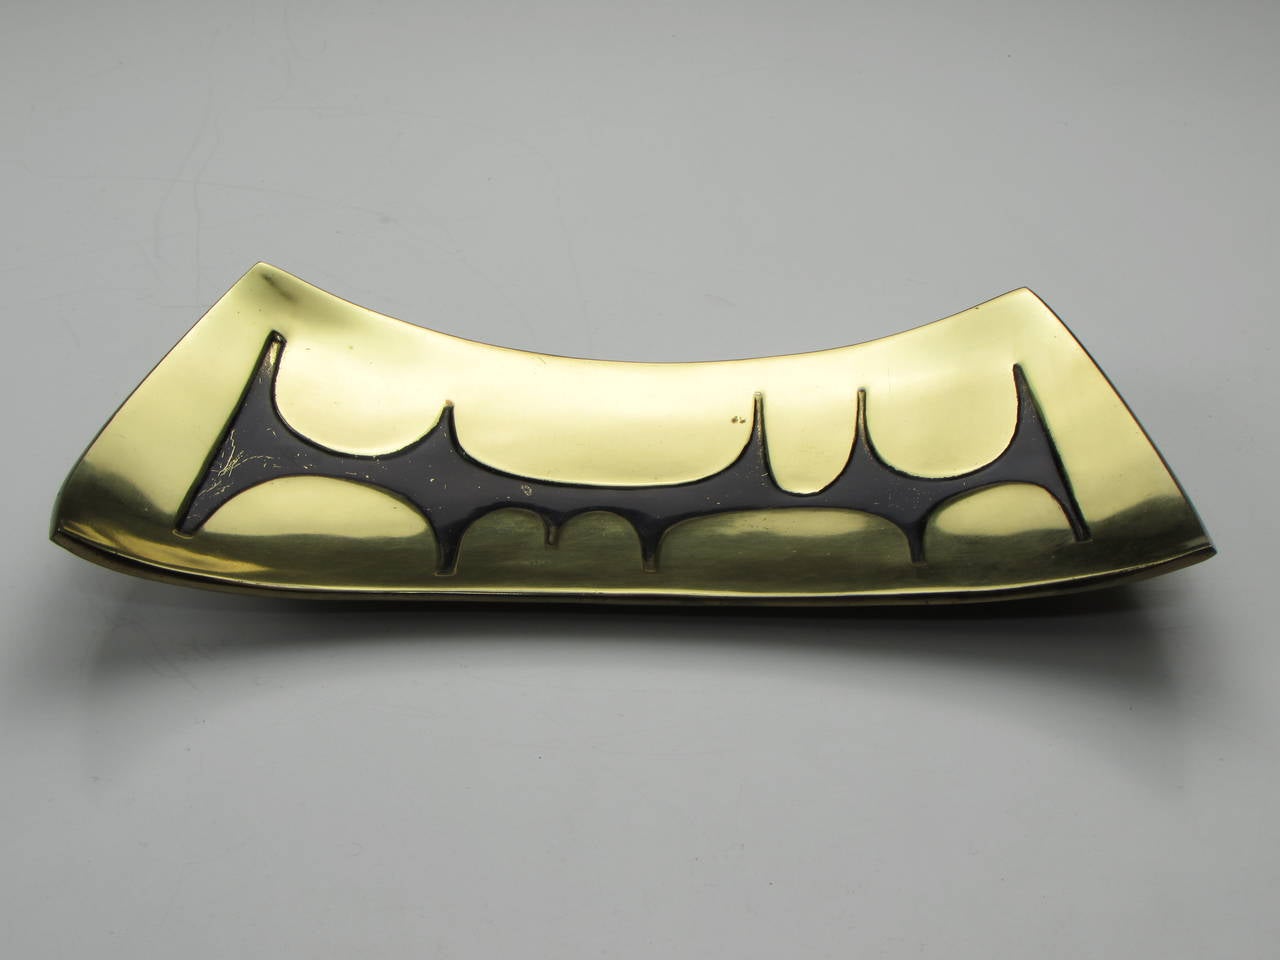 Very Rare and Early Cast Bronze Enamel Tray by Paul Evans Studio, New Hope 1956. The only other example of this piece we have seen is documented in the Paul Evans book. Very good vintage condition with minor overall wear consistent with age and use.